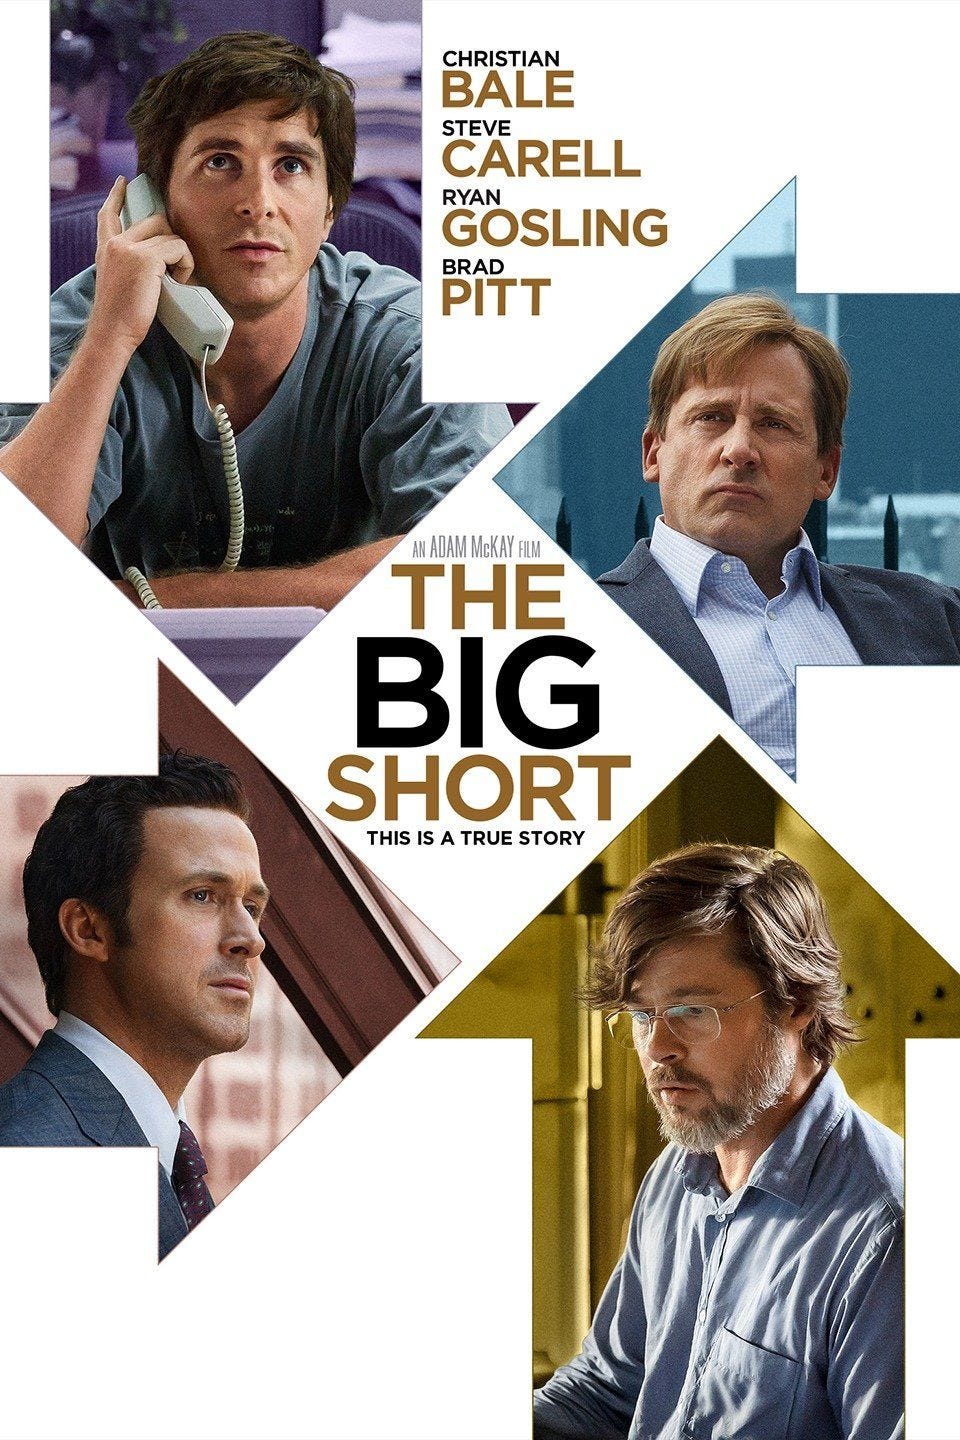 The Big Short A movie that explains the 2008 financial crash in Wall Street